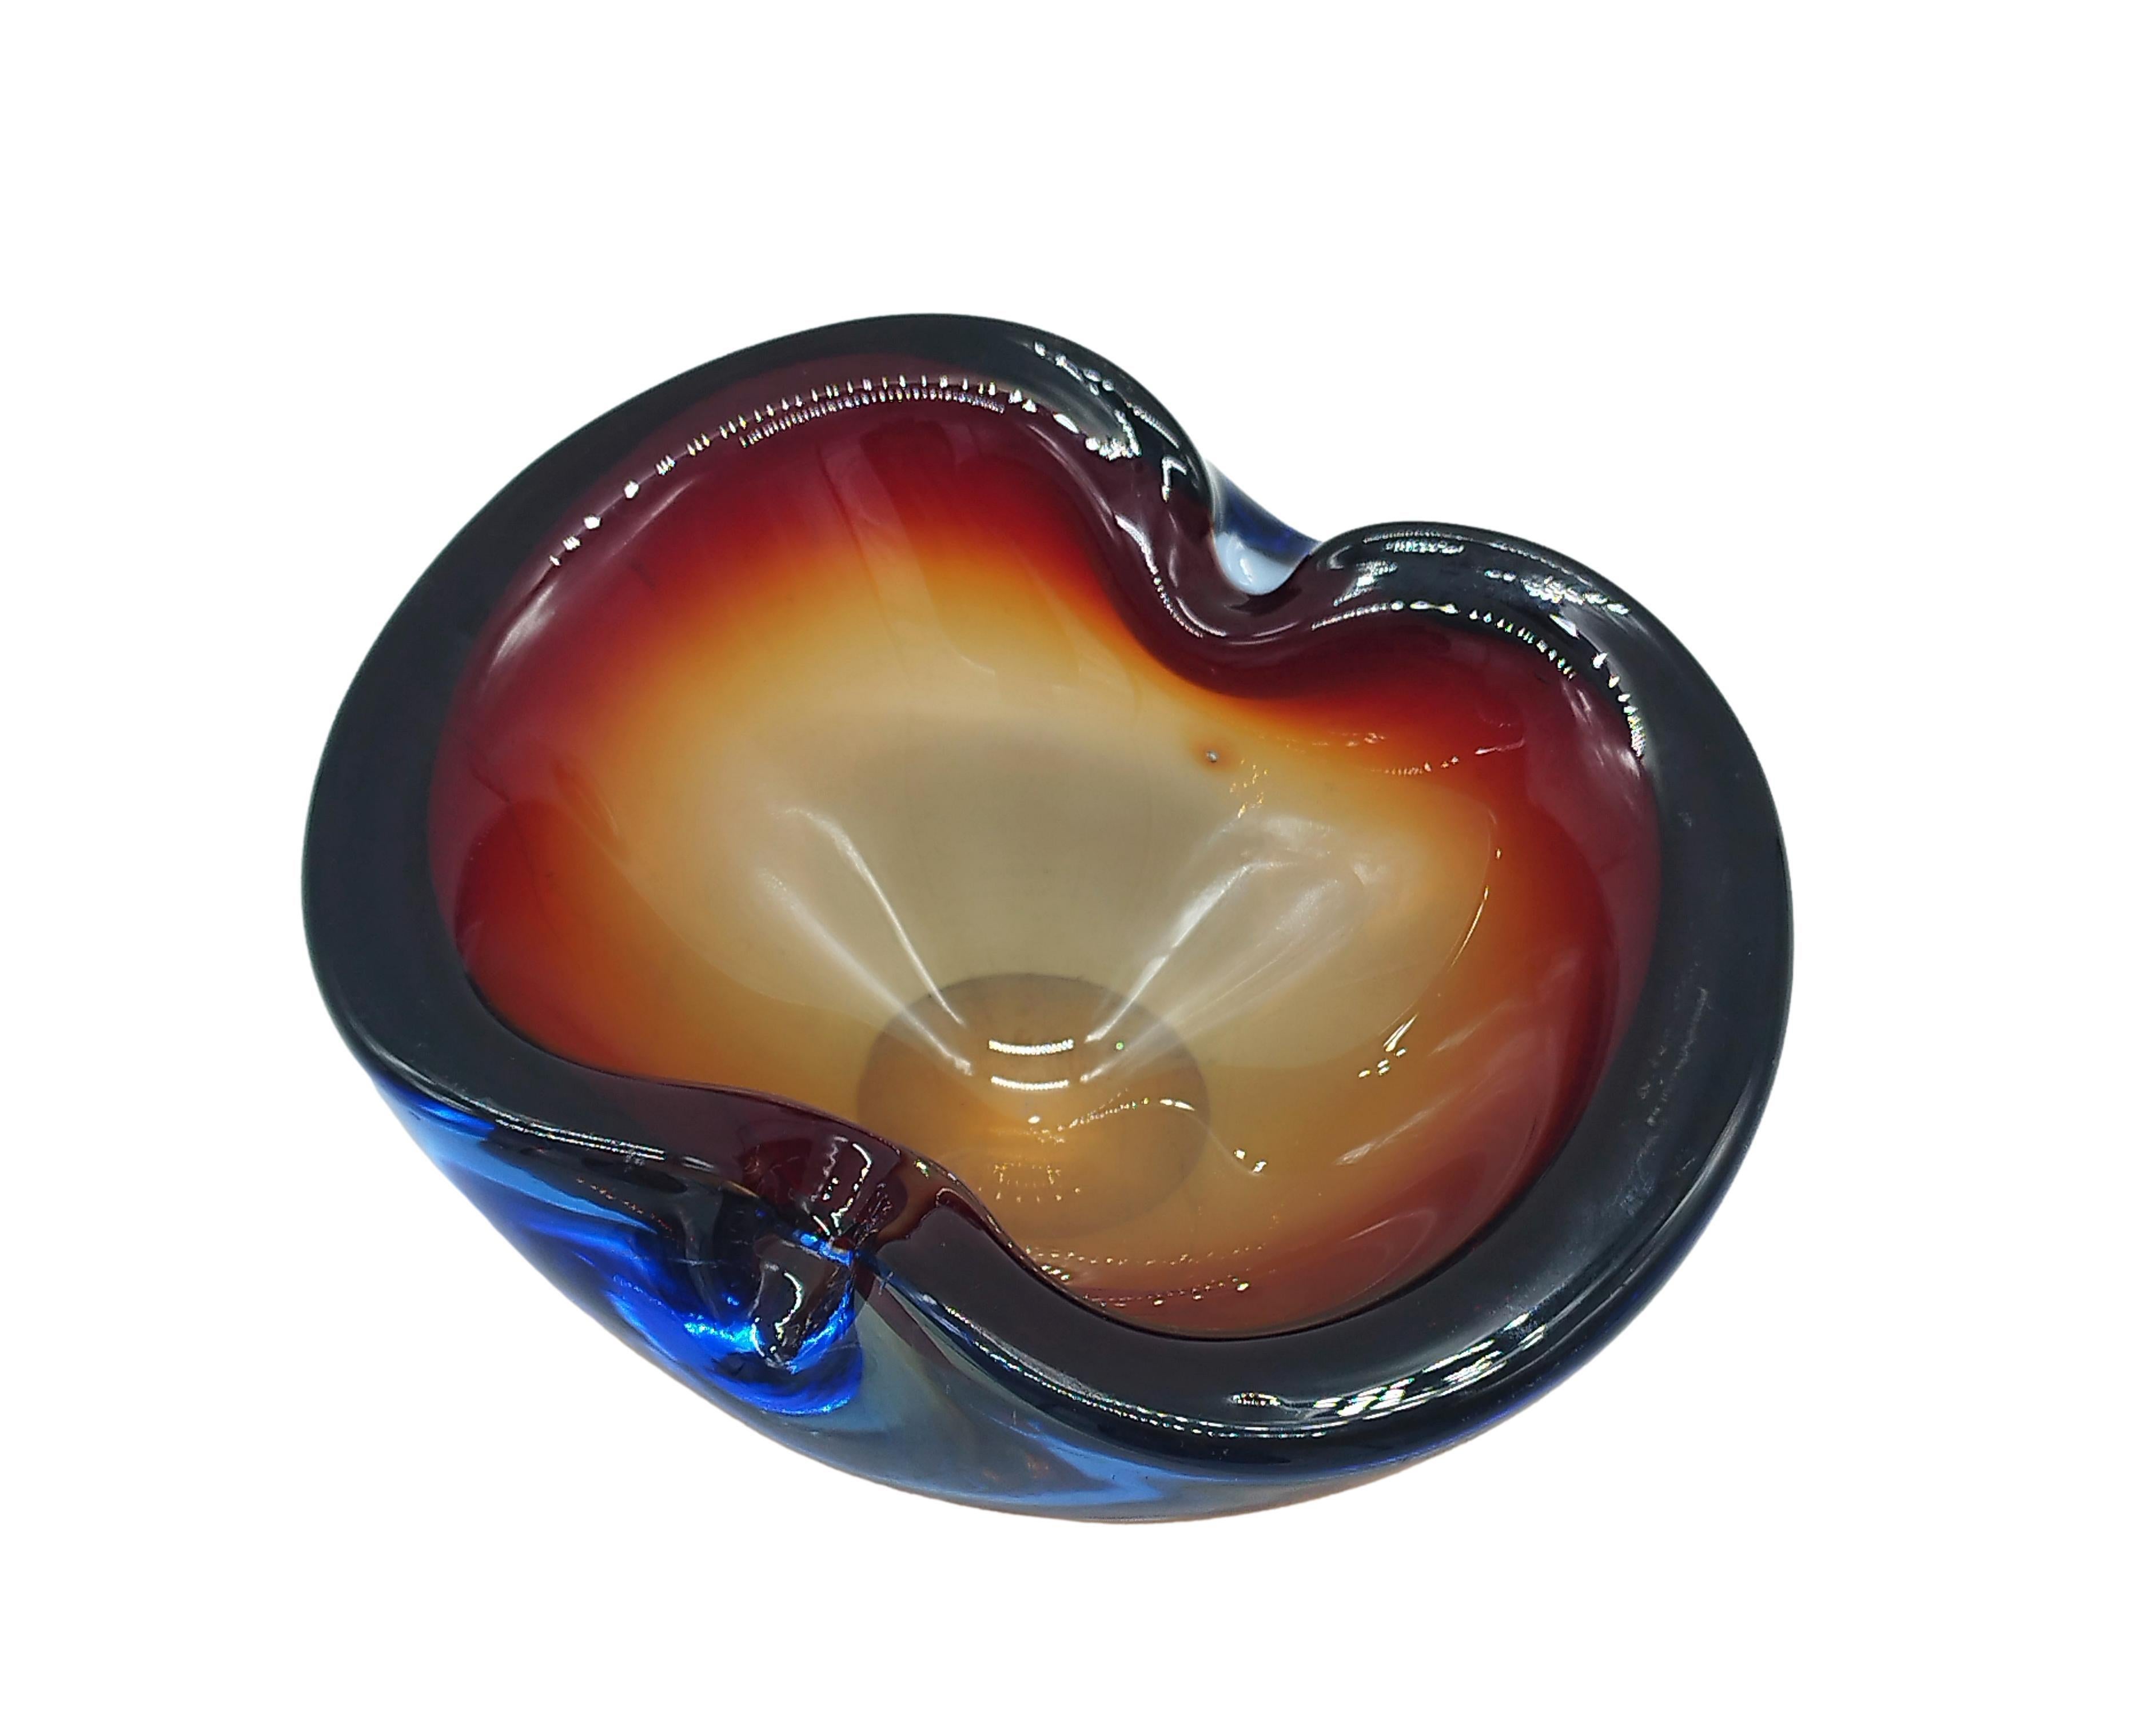 Hand-blown submerged Murano art glass bowl or ashtray , period circa 1950s, Italy. The piece is made of blue, rosSo and orange art glass, oval in shape, with two indentations on the rim. Great as an ornament for a cocktail table, sideboard, coffee